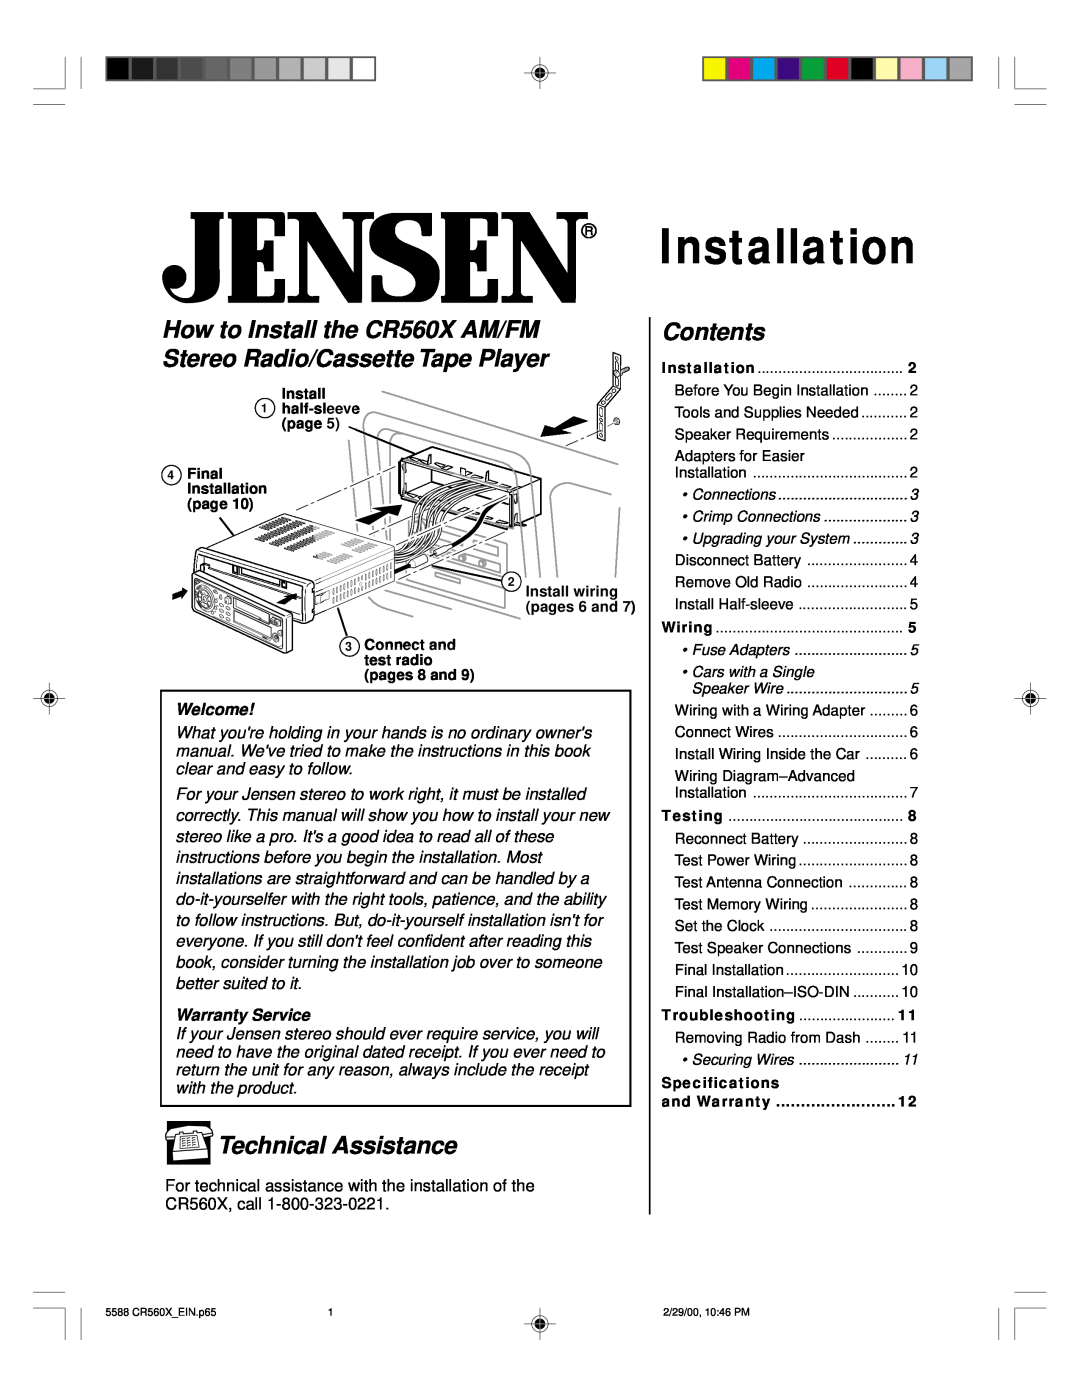 Jensen CR560X specifications Technical Assistance, Contents, Installation, Upgrading your System, Fuse Adapters 